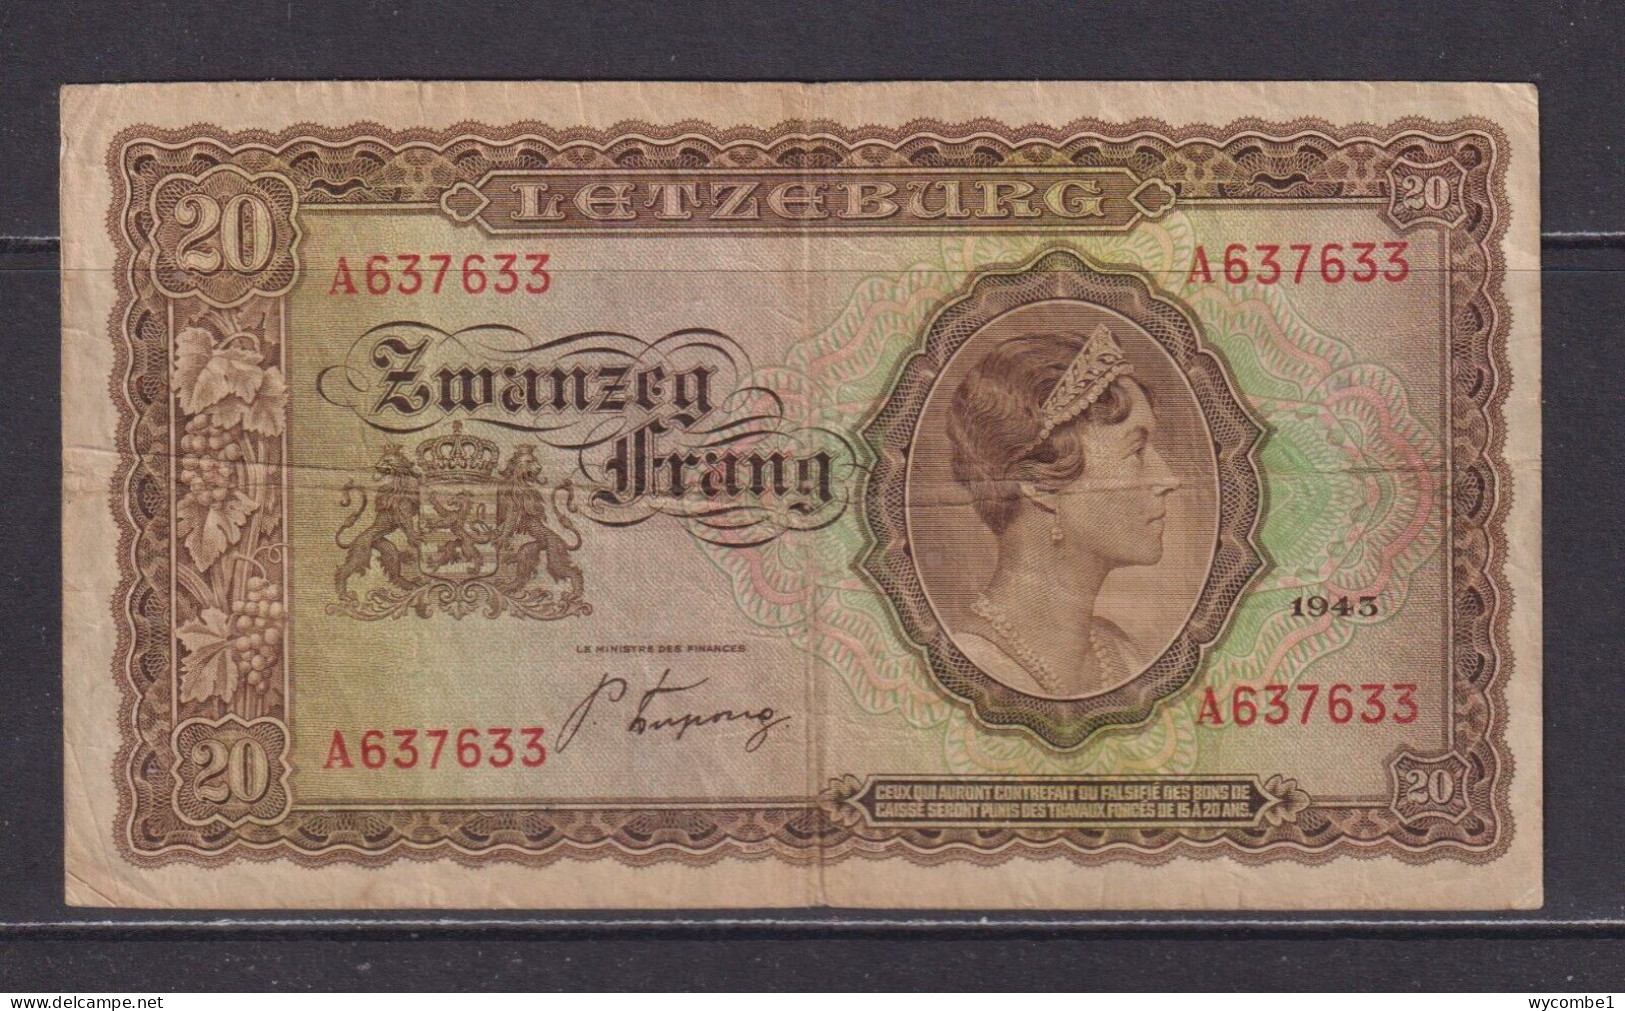 LUXEMBOURG - 1943 20 Francs Circulated Banknote - Luxembourg